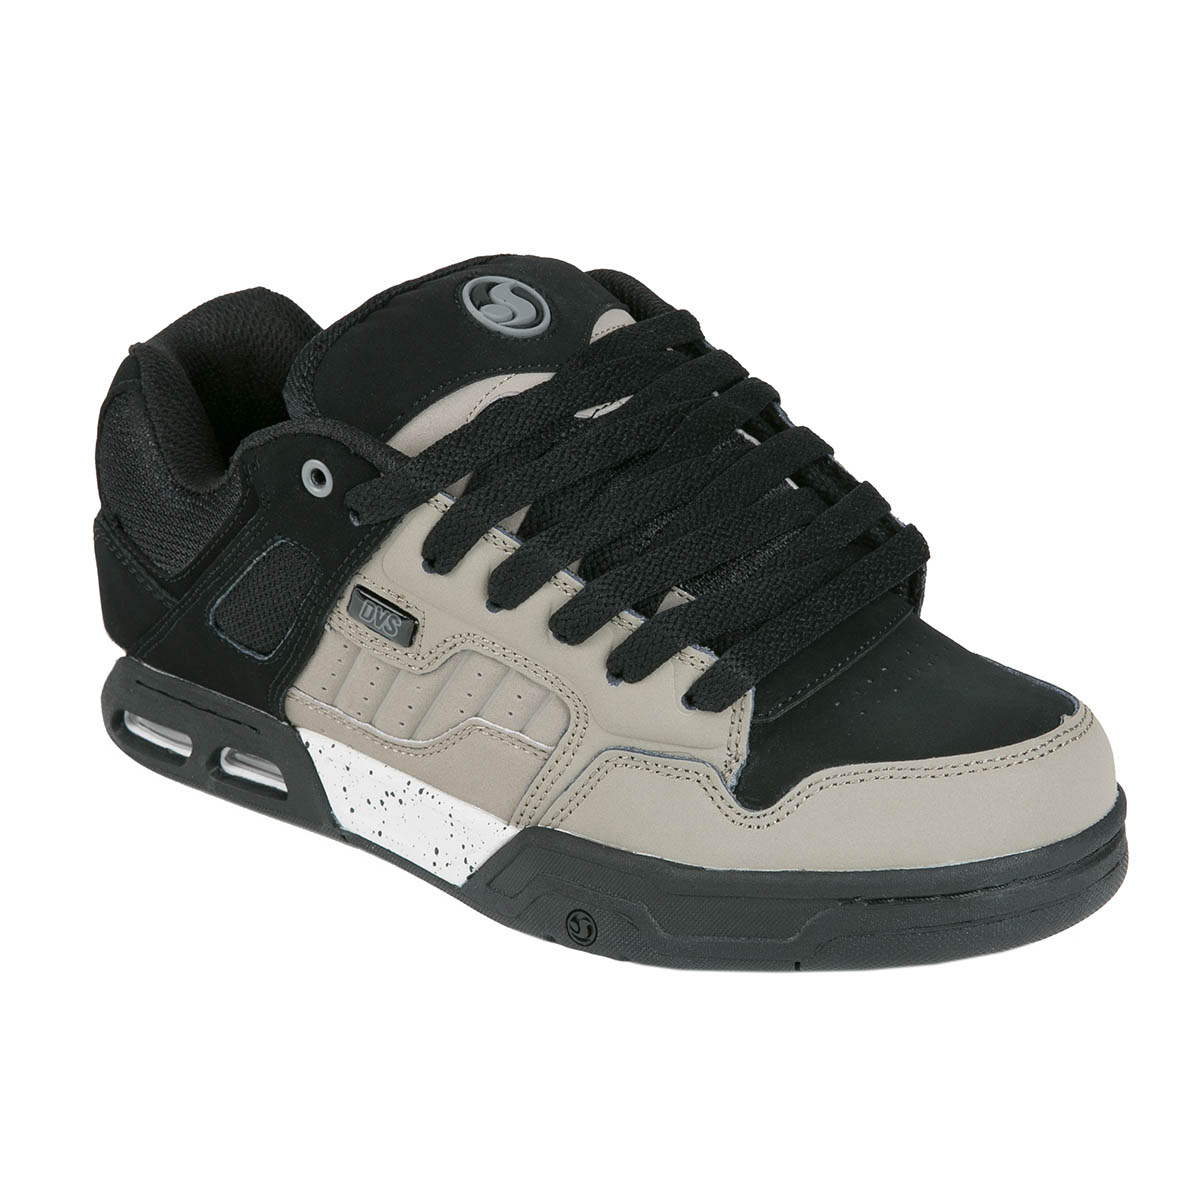 DVS Chaussures Enduro Heir Taupe Black Leather